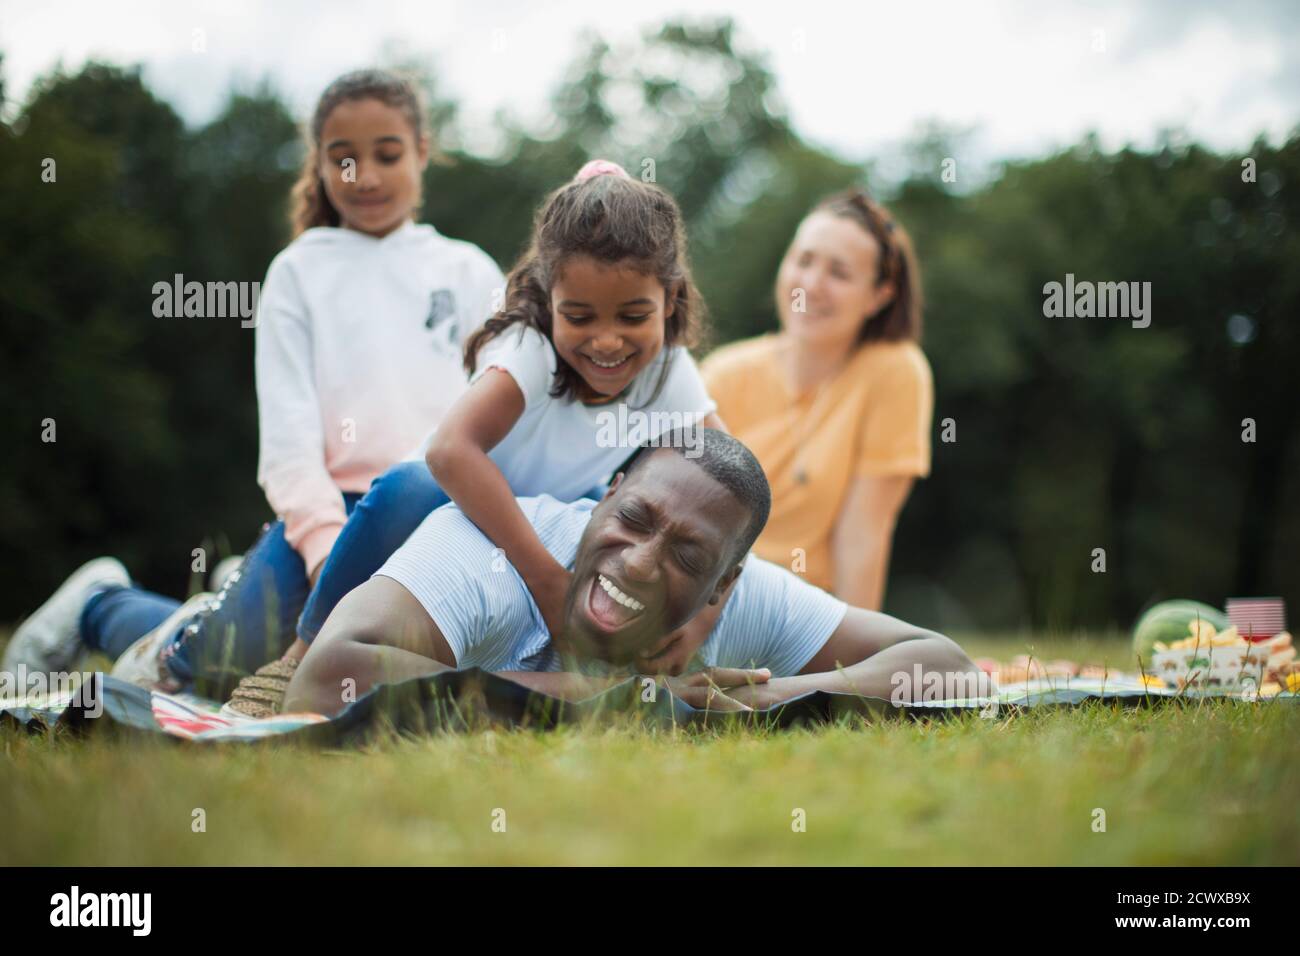 Happy playful family on picnic blanket in park Stock Photo